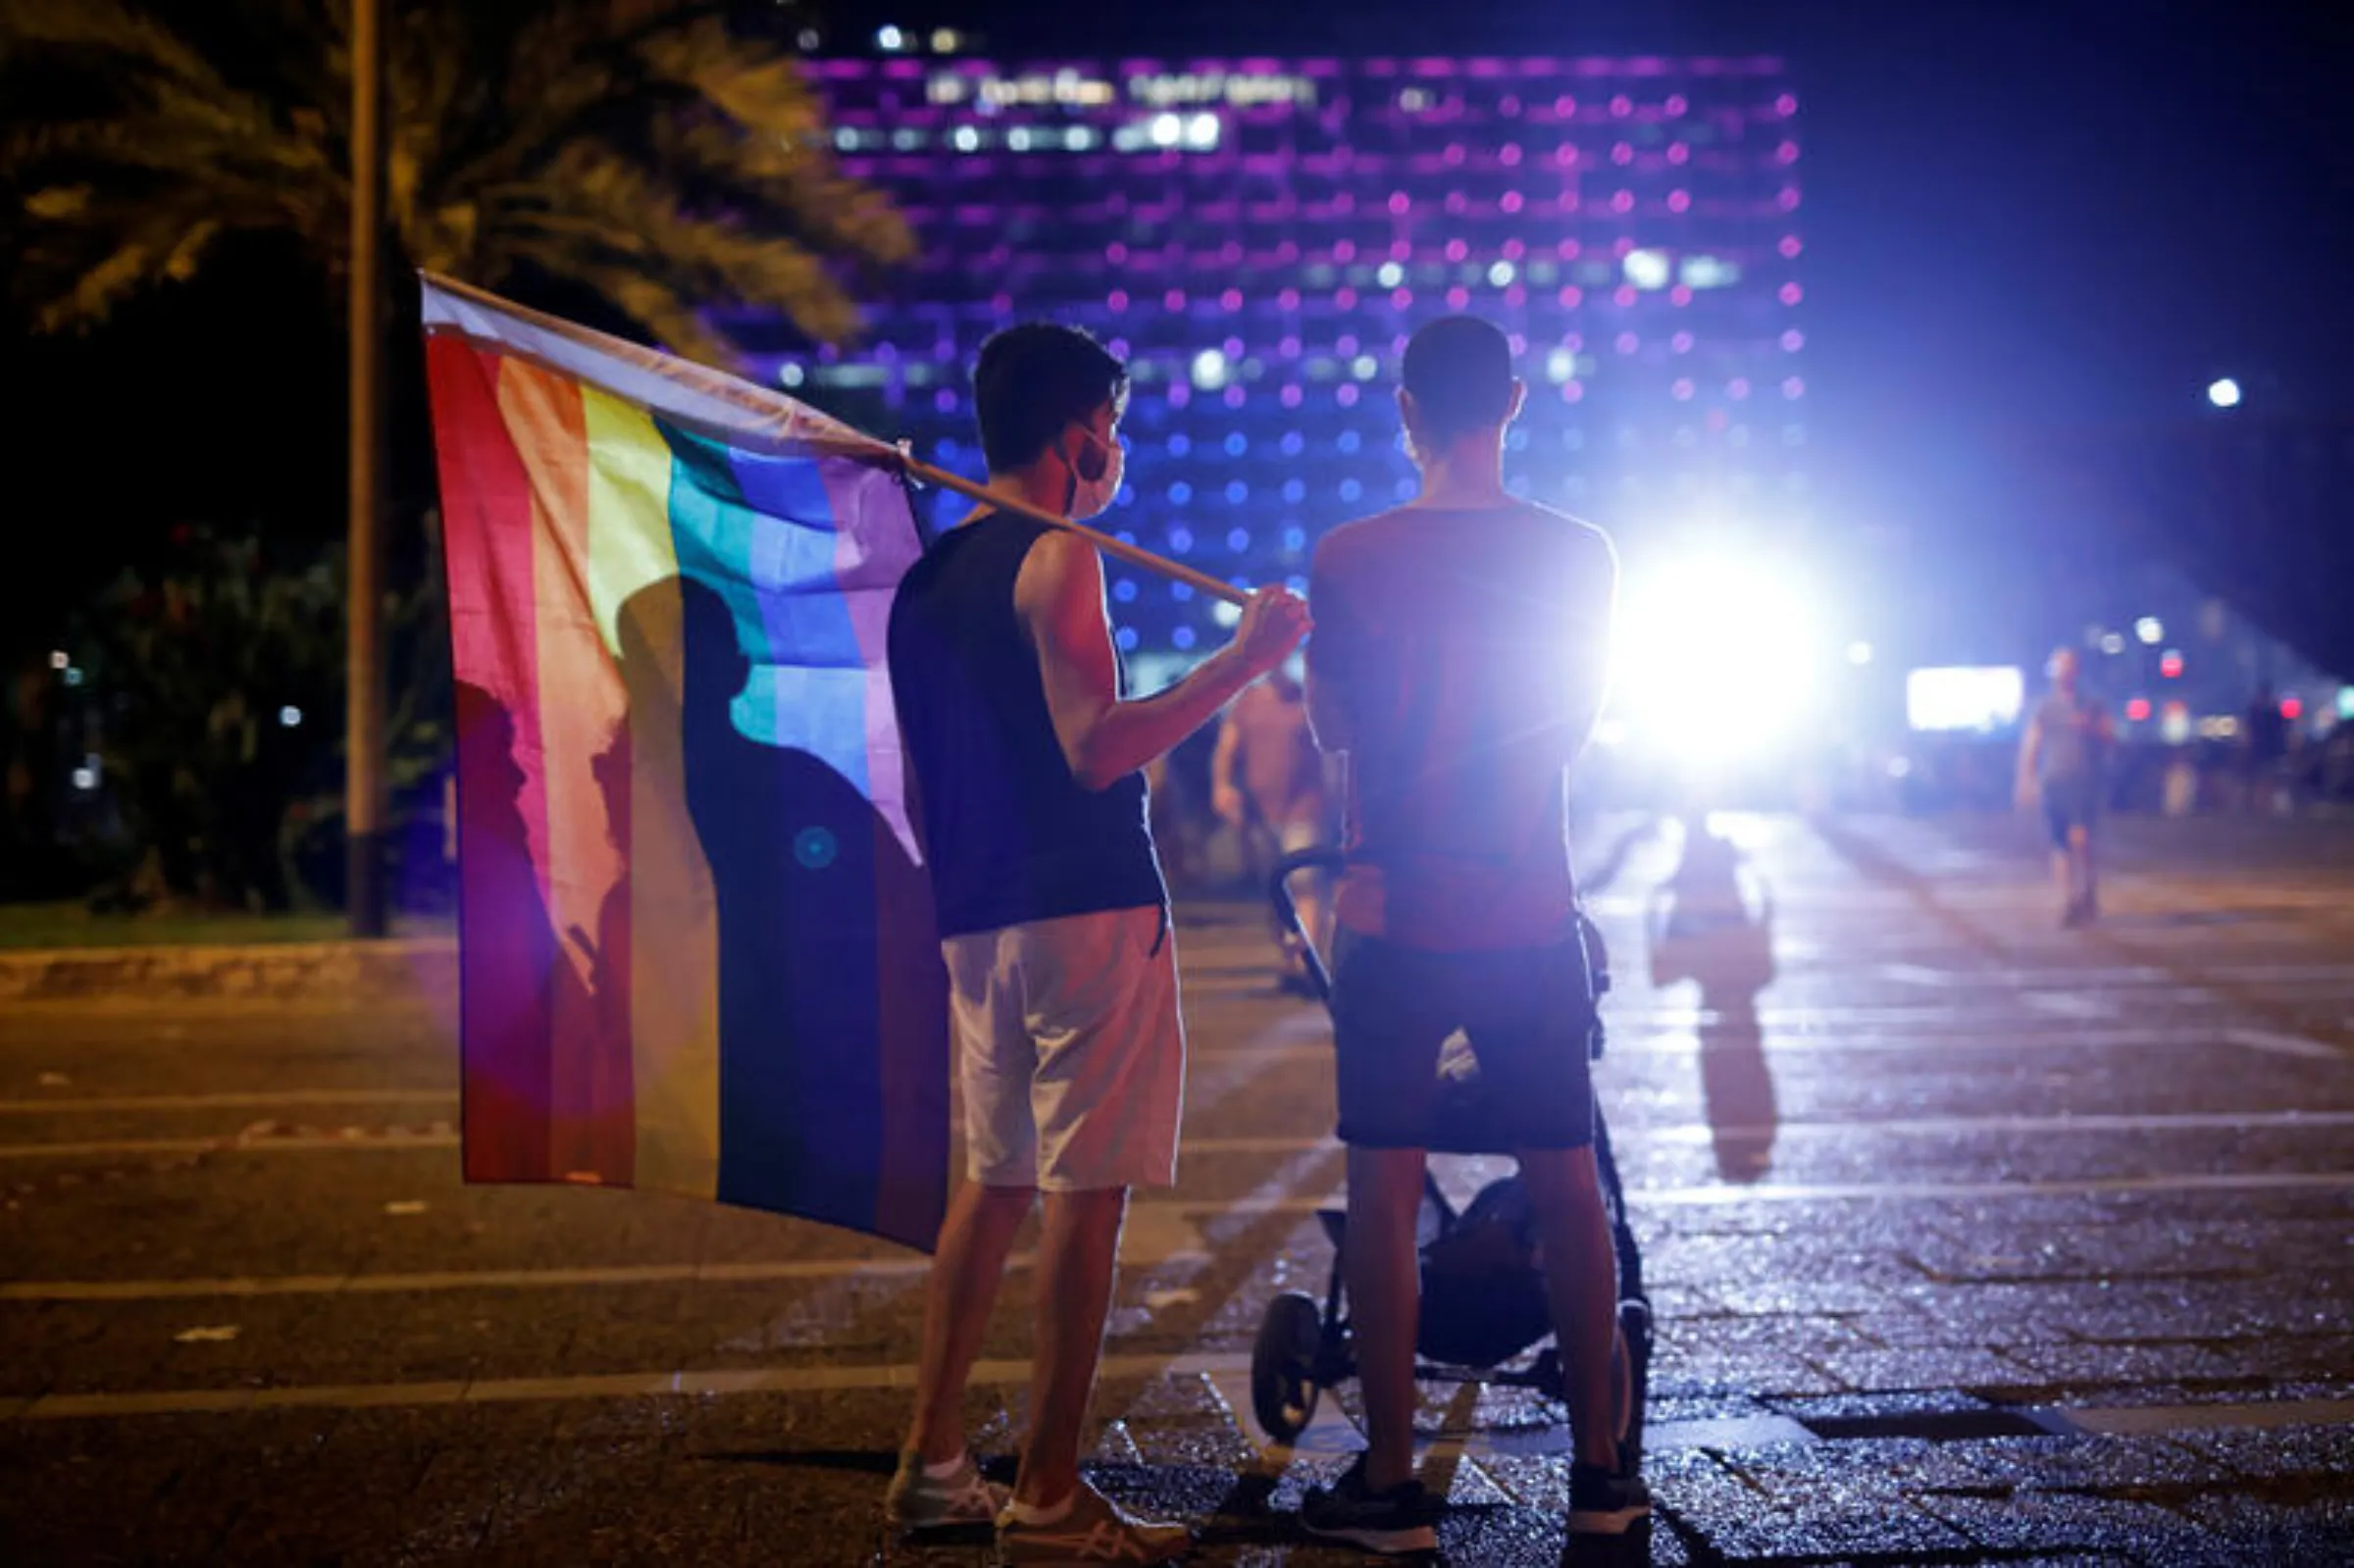 People hold a rainbow flag as they stand by a baby carriage during a Gay Pride event in Tel Aviv, Israel June 28, 2020. REUTERS/Amir Cohen